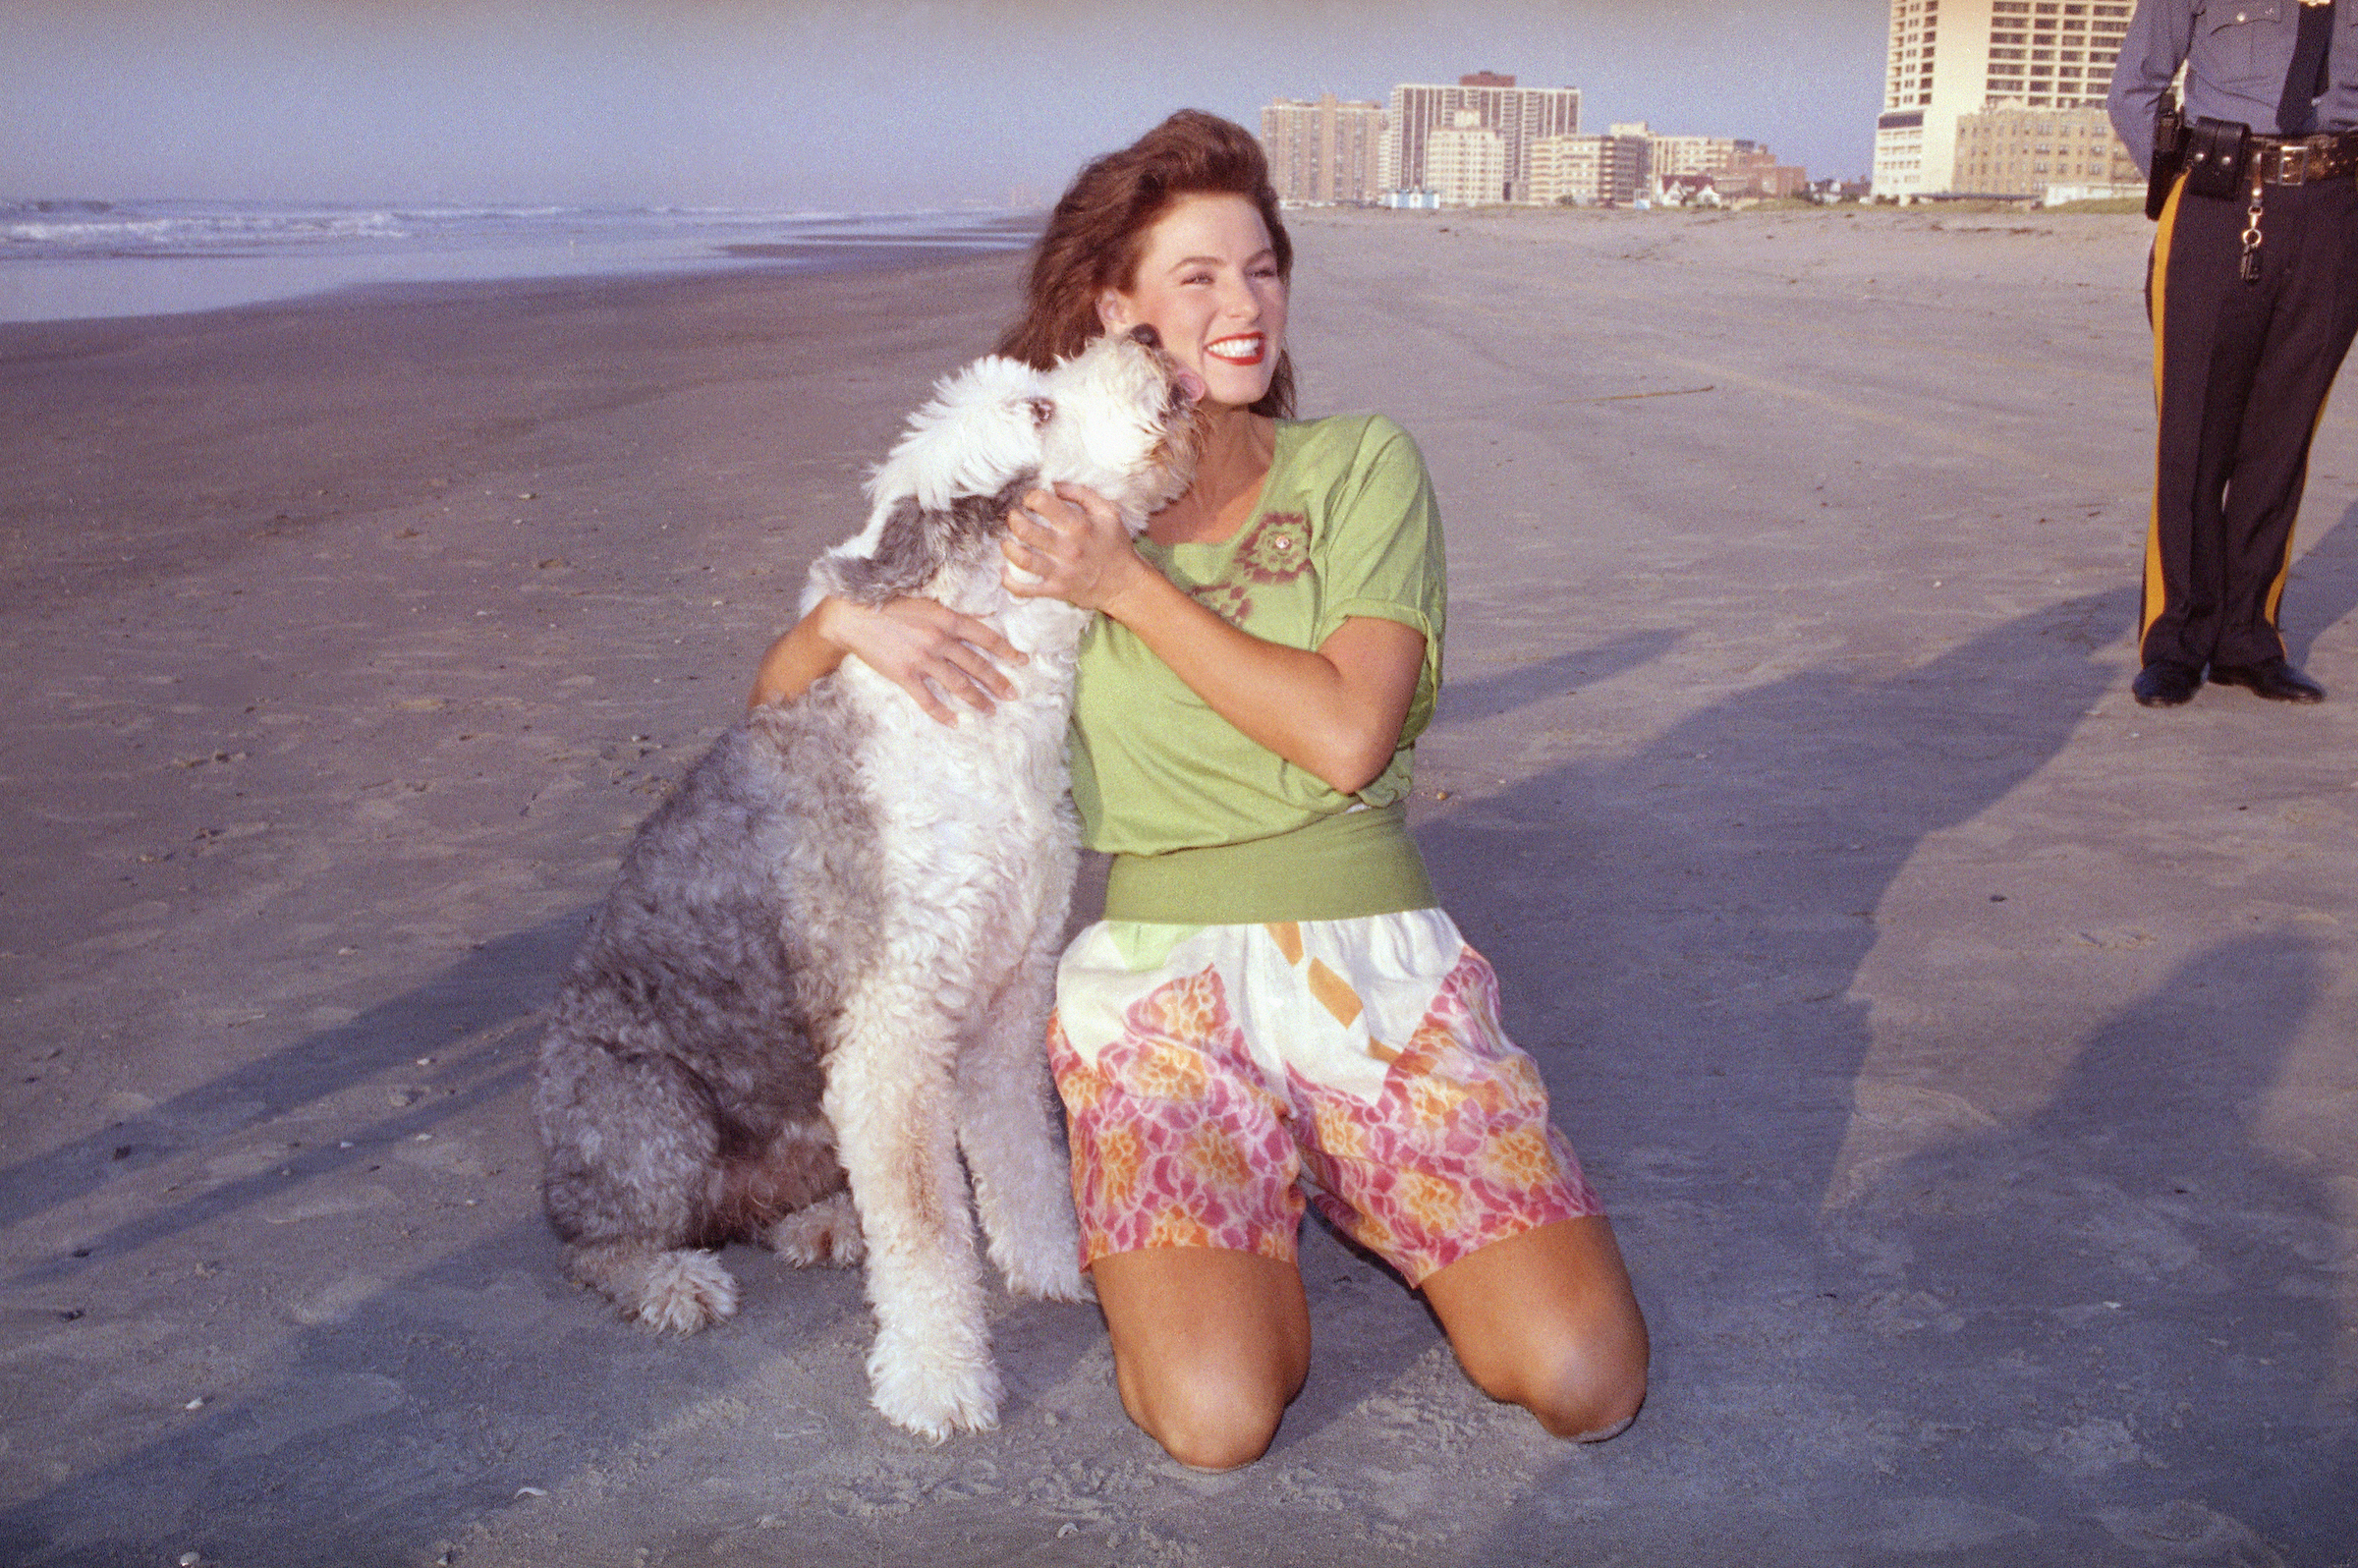 Jade, an Old English sheepdog, licks the face of the newly-crowned Miss America, Carolyn Sapp, during the traditional walk on the beach in Atlantic City, N.J. on Sept, 15, 1991. (Mike Derer—AP)